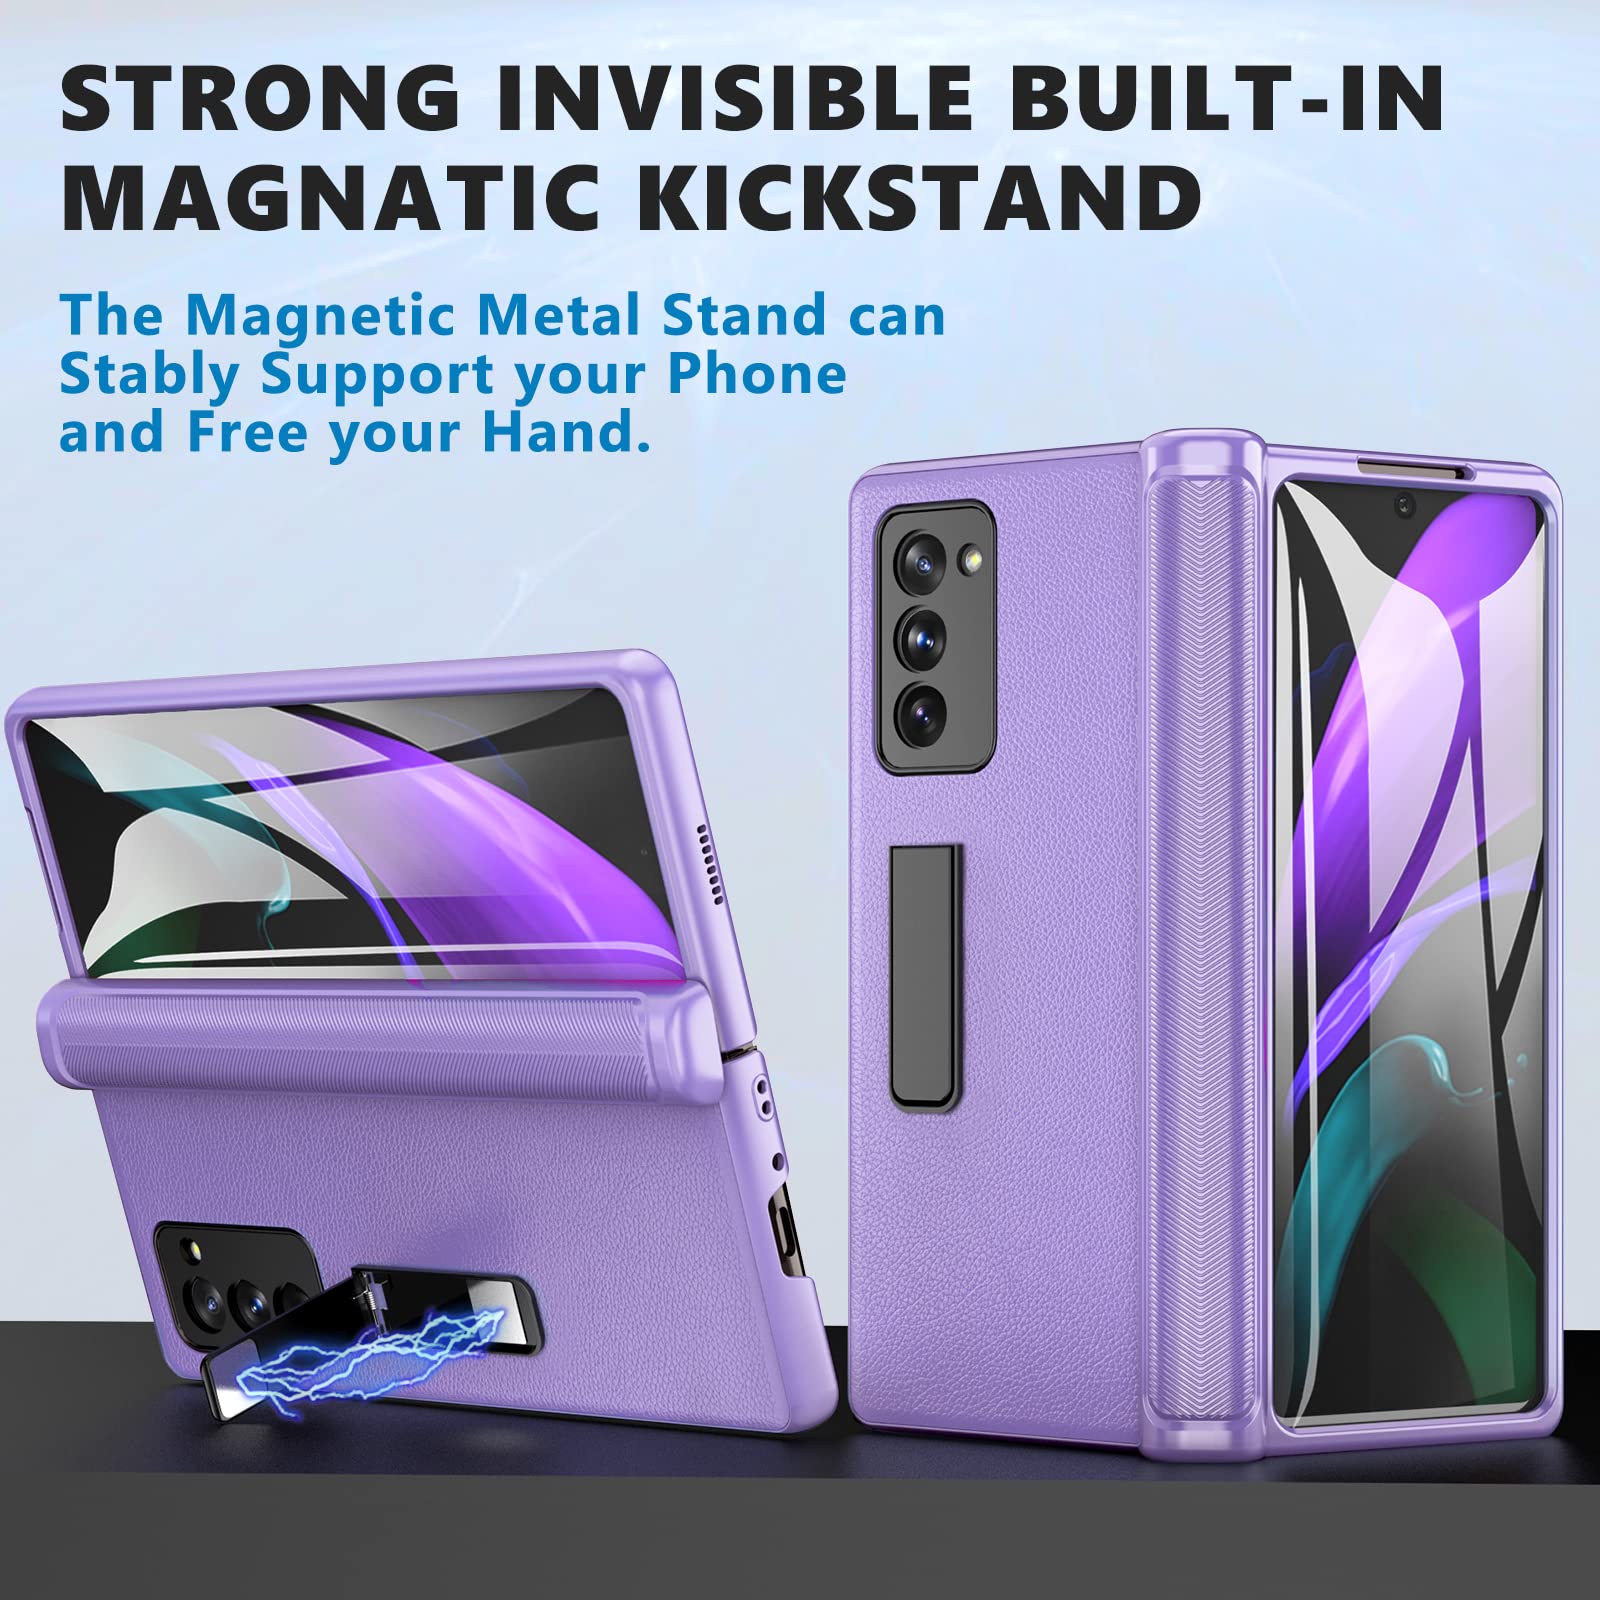 Vihibii for Galaxy Z Fold 2 5G Case with Hinge Protection, Z Fold 2 Phone Case with Screen Protector & Kickstand for Women Girls, Luxury Leather Protective Case for Samsung Galaxy Z Fold 2 (Purple)